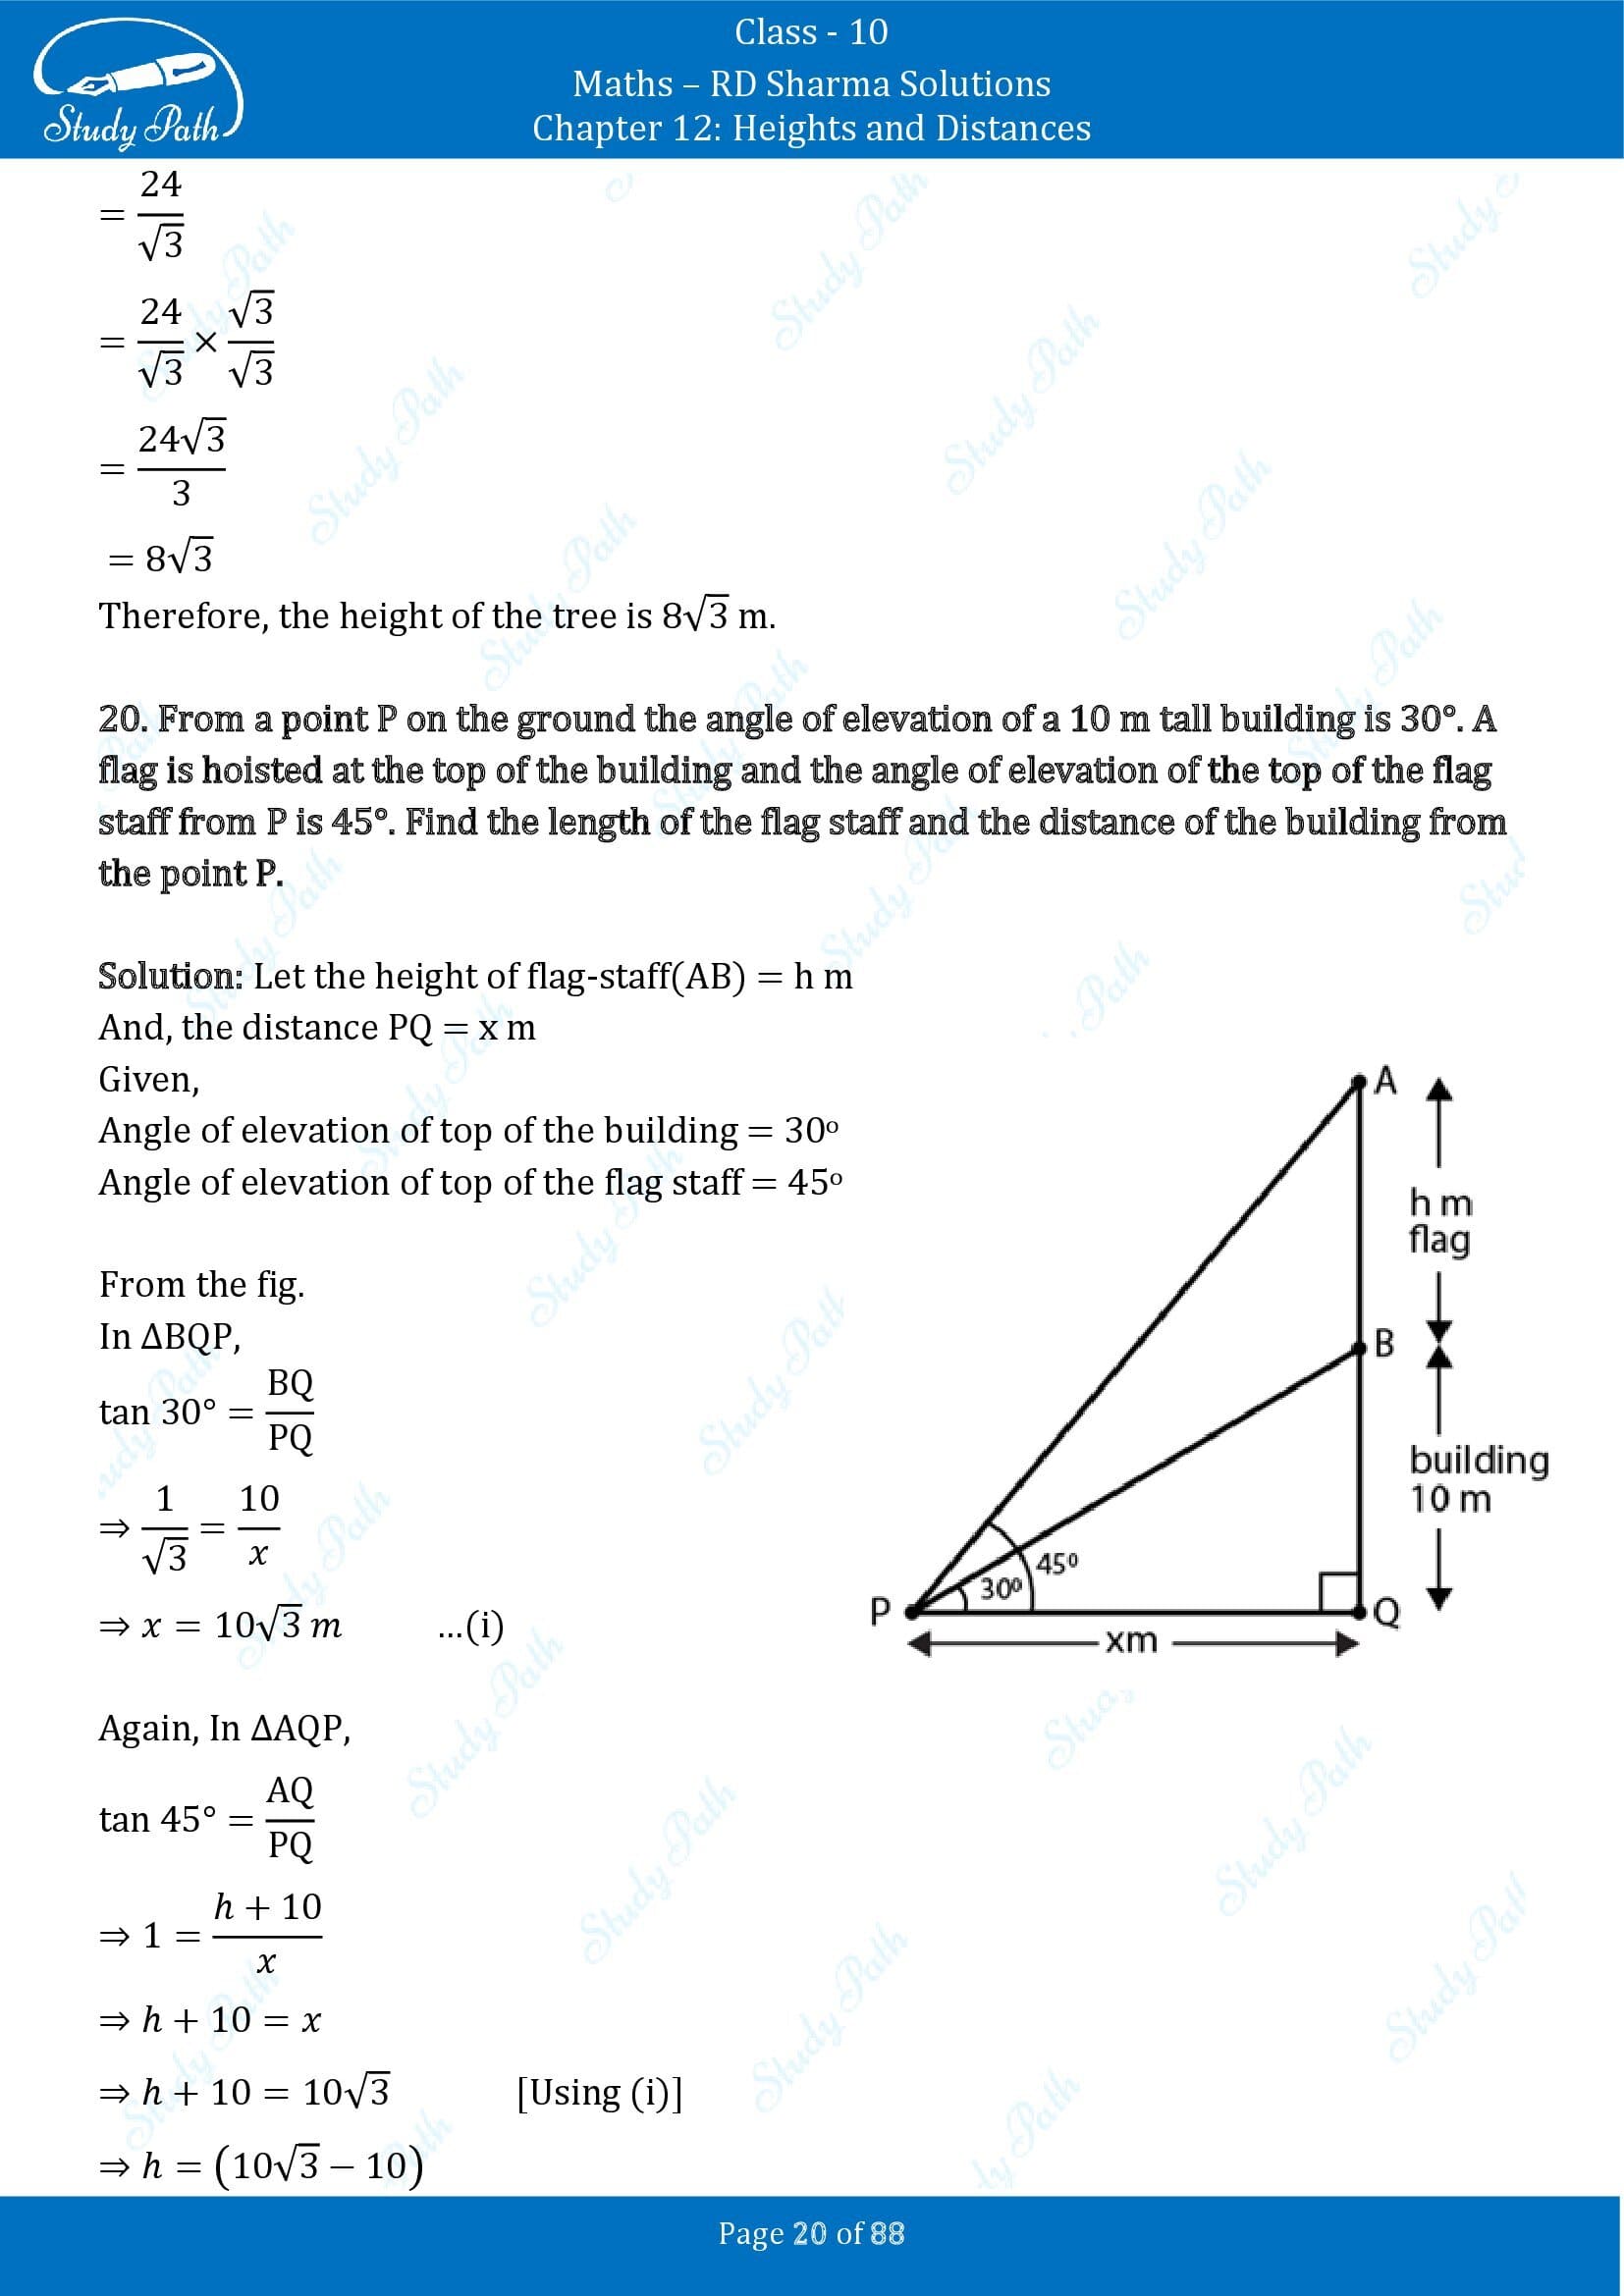 RD Sharma Solutions Class 10 Chapter 12 Heights and Distances Exercise 12.1 00020